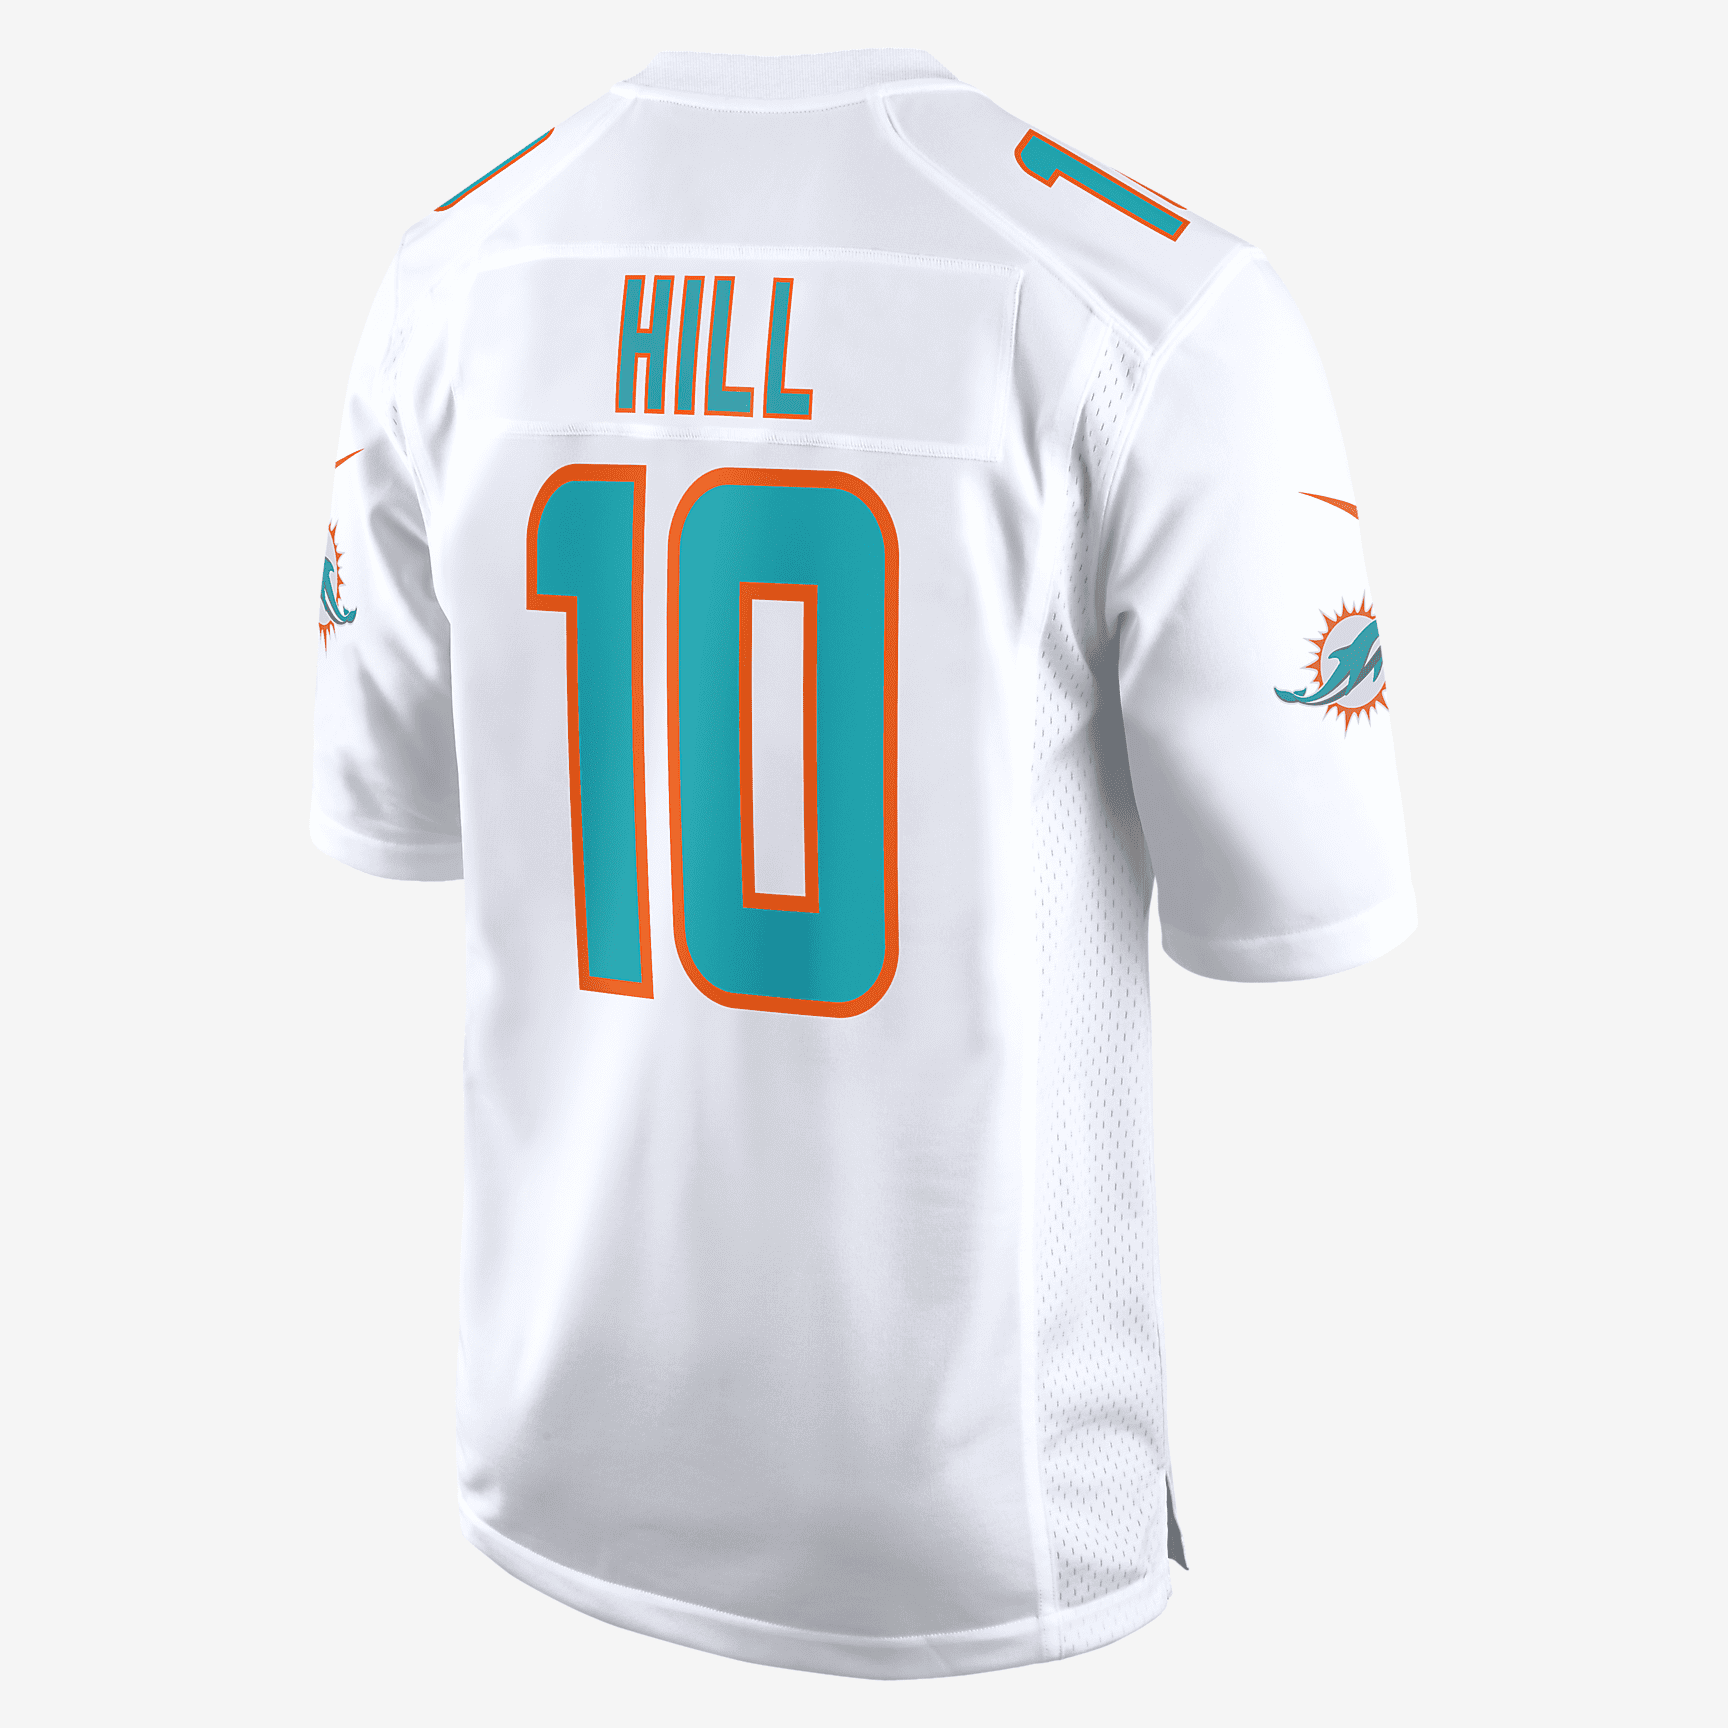 MIAMI DOLPHINS GAME NFL FOOTBALL JERSEY